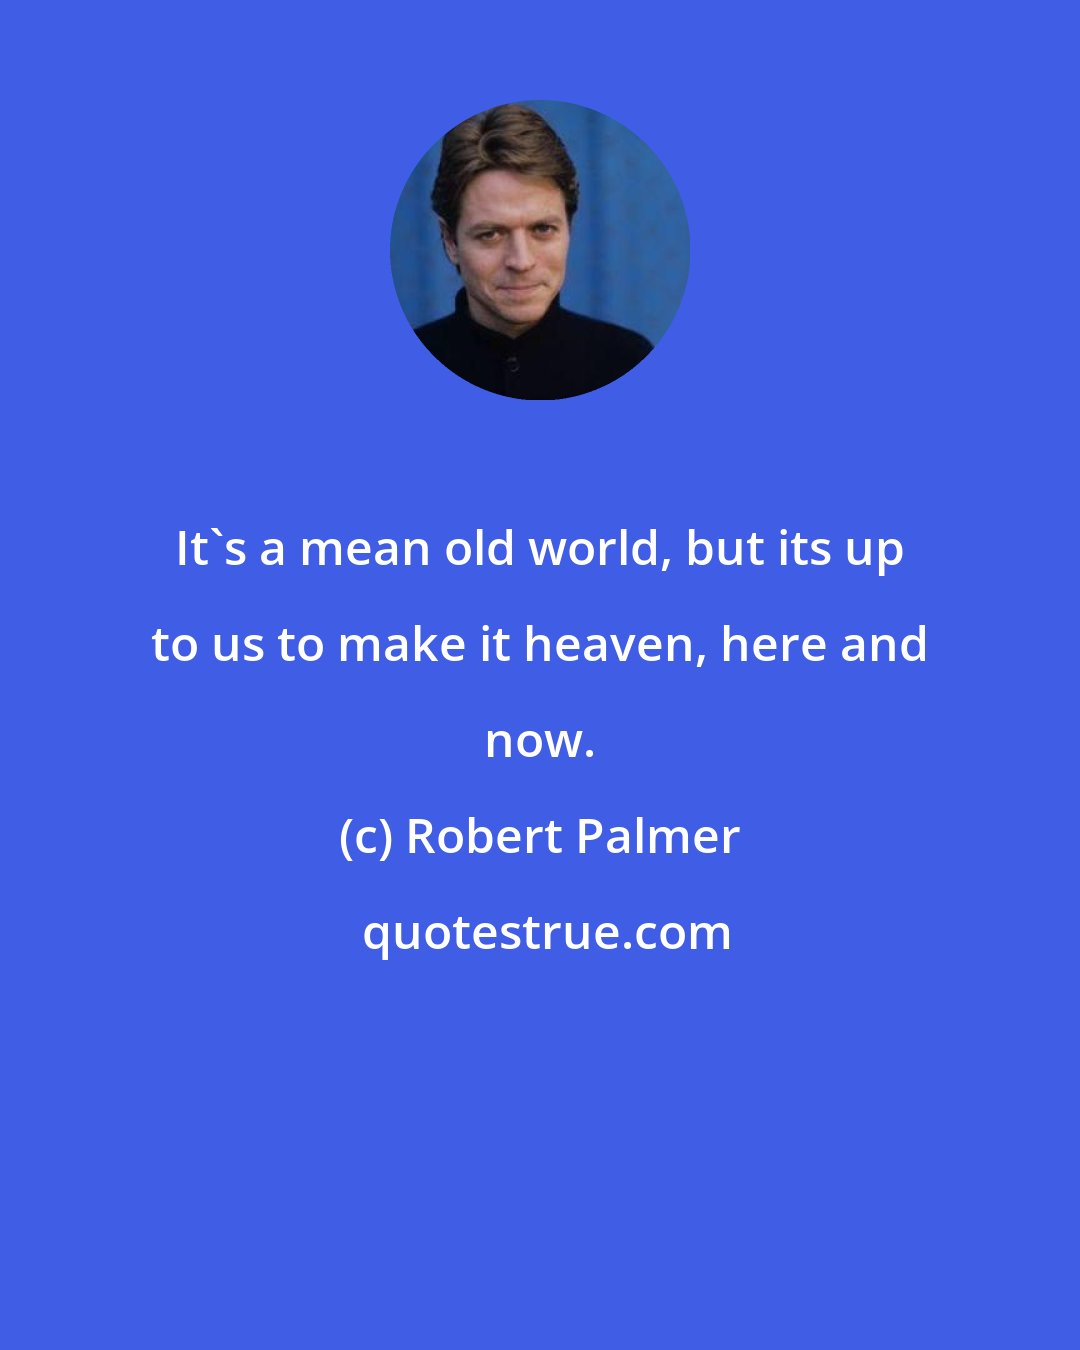 Robert Palmer: It's a mean old world, but its up to us to make it heaven, here and now.